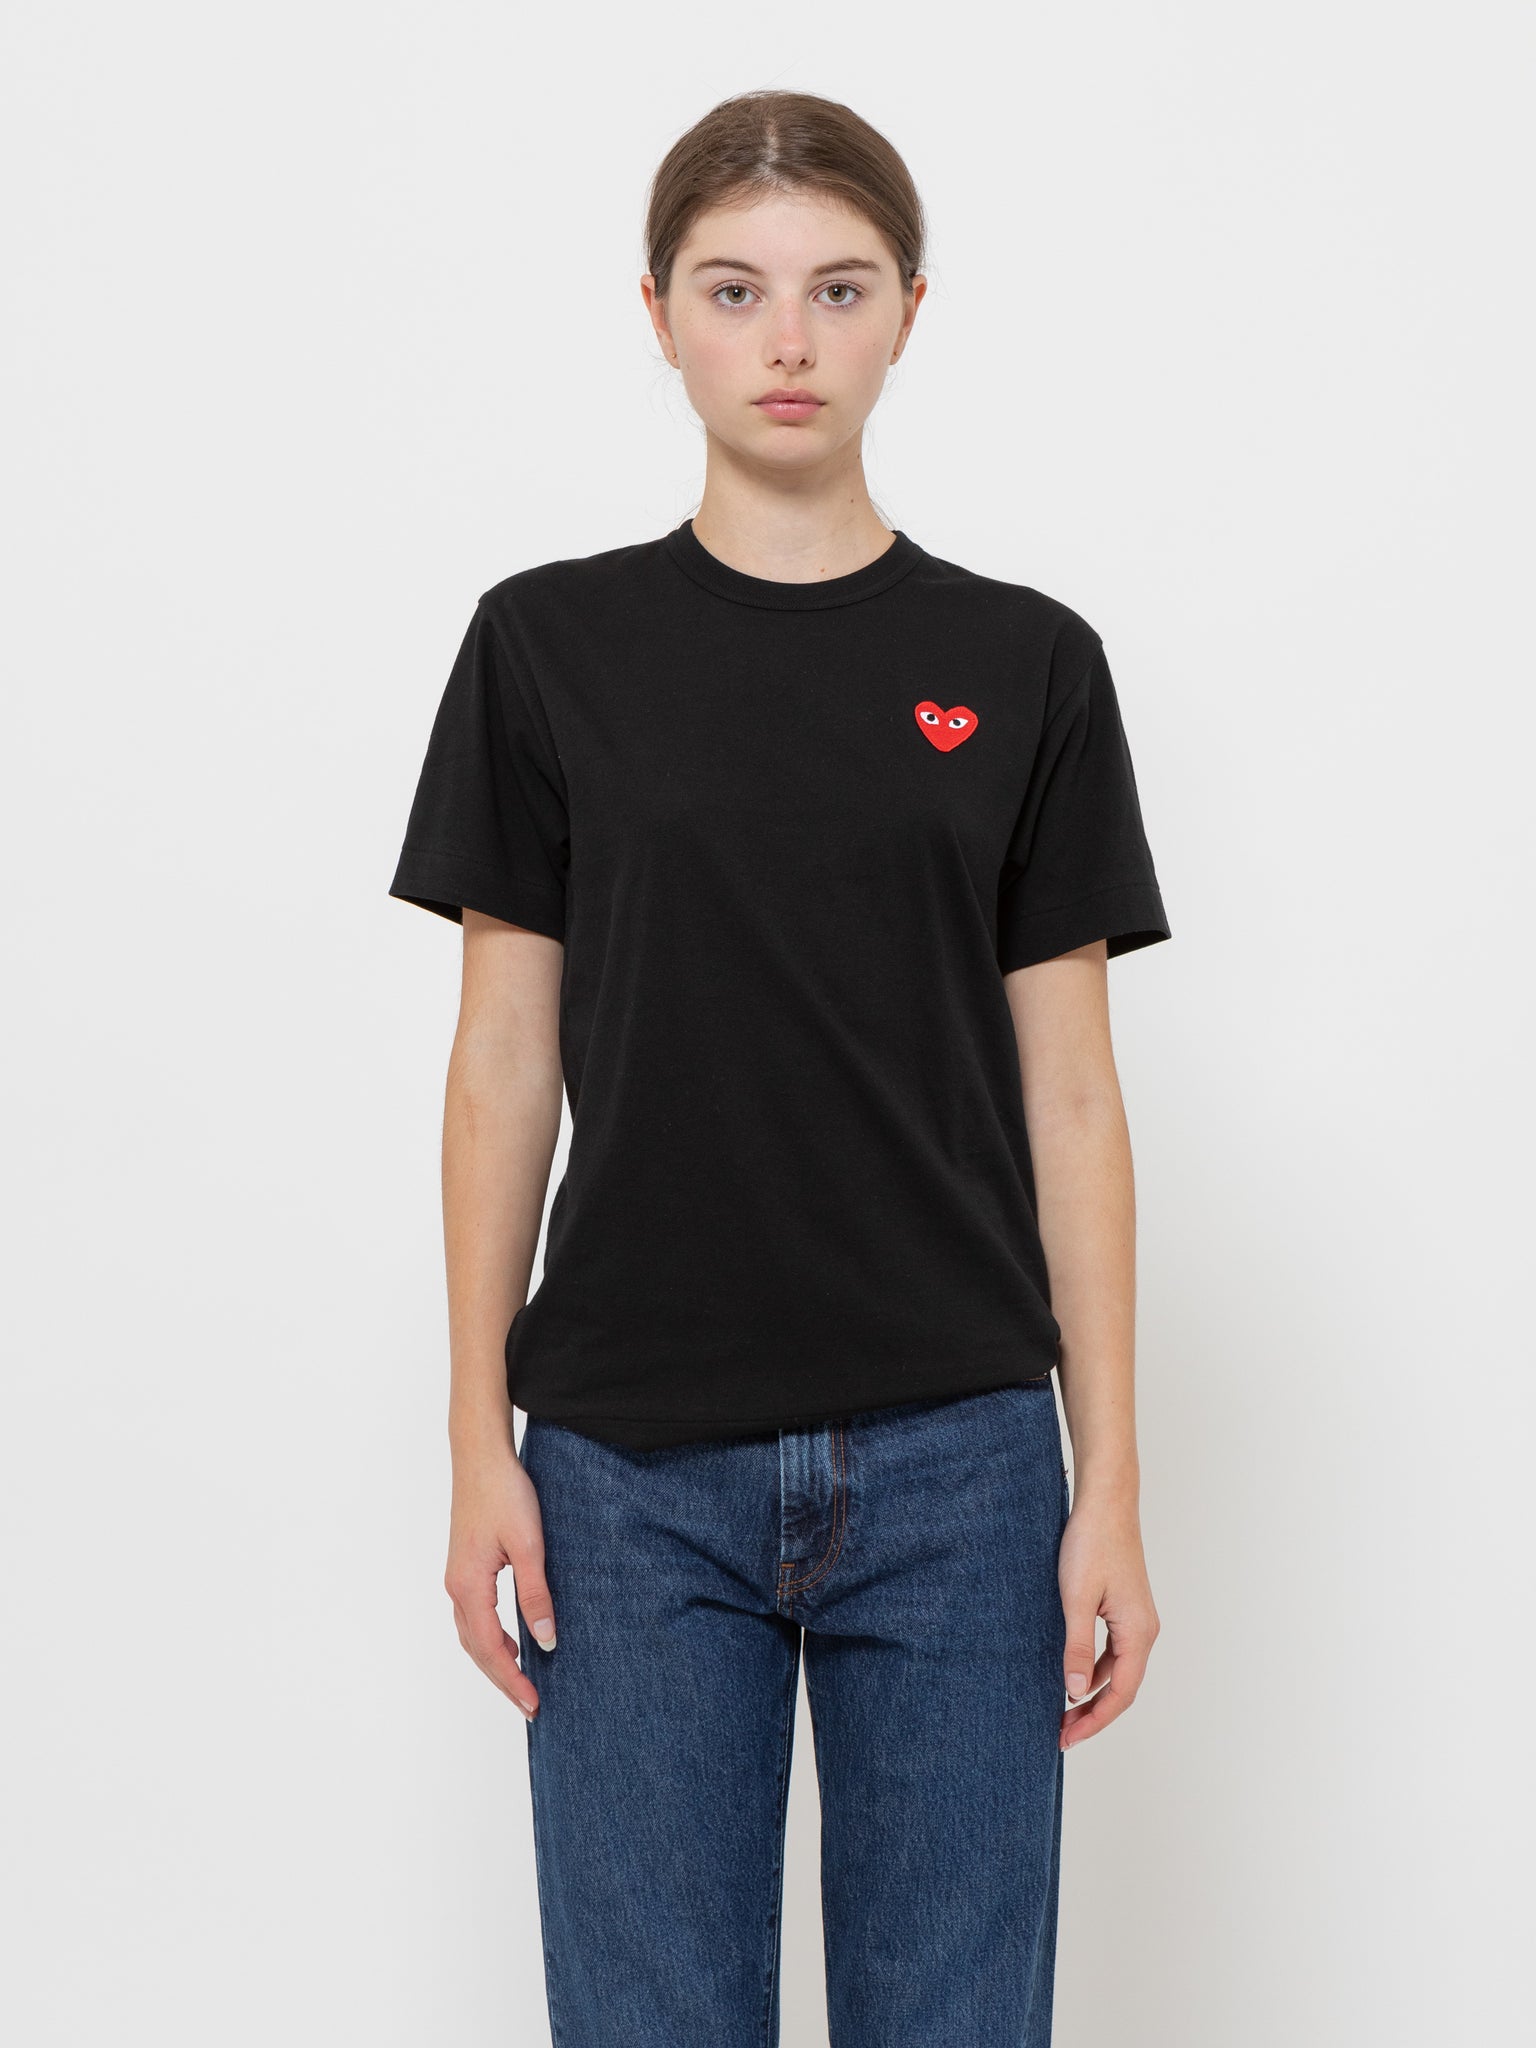 Men's Fit T-Shirt Black with Red Heart